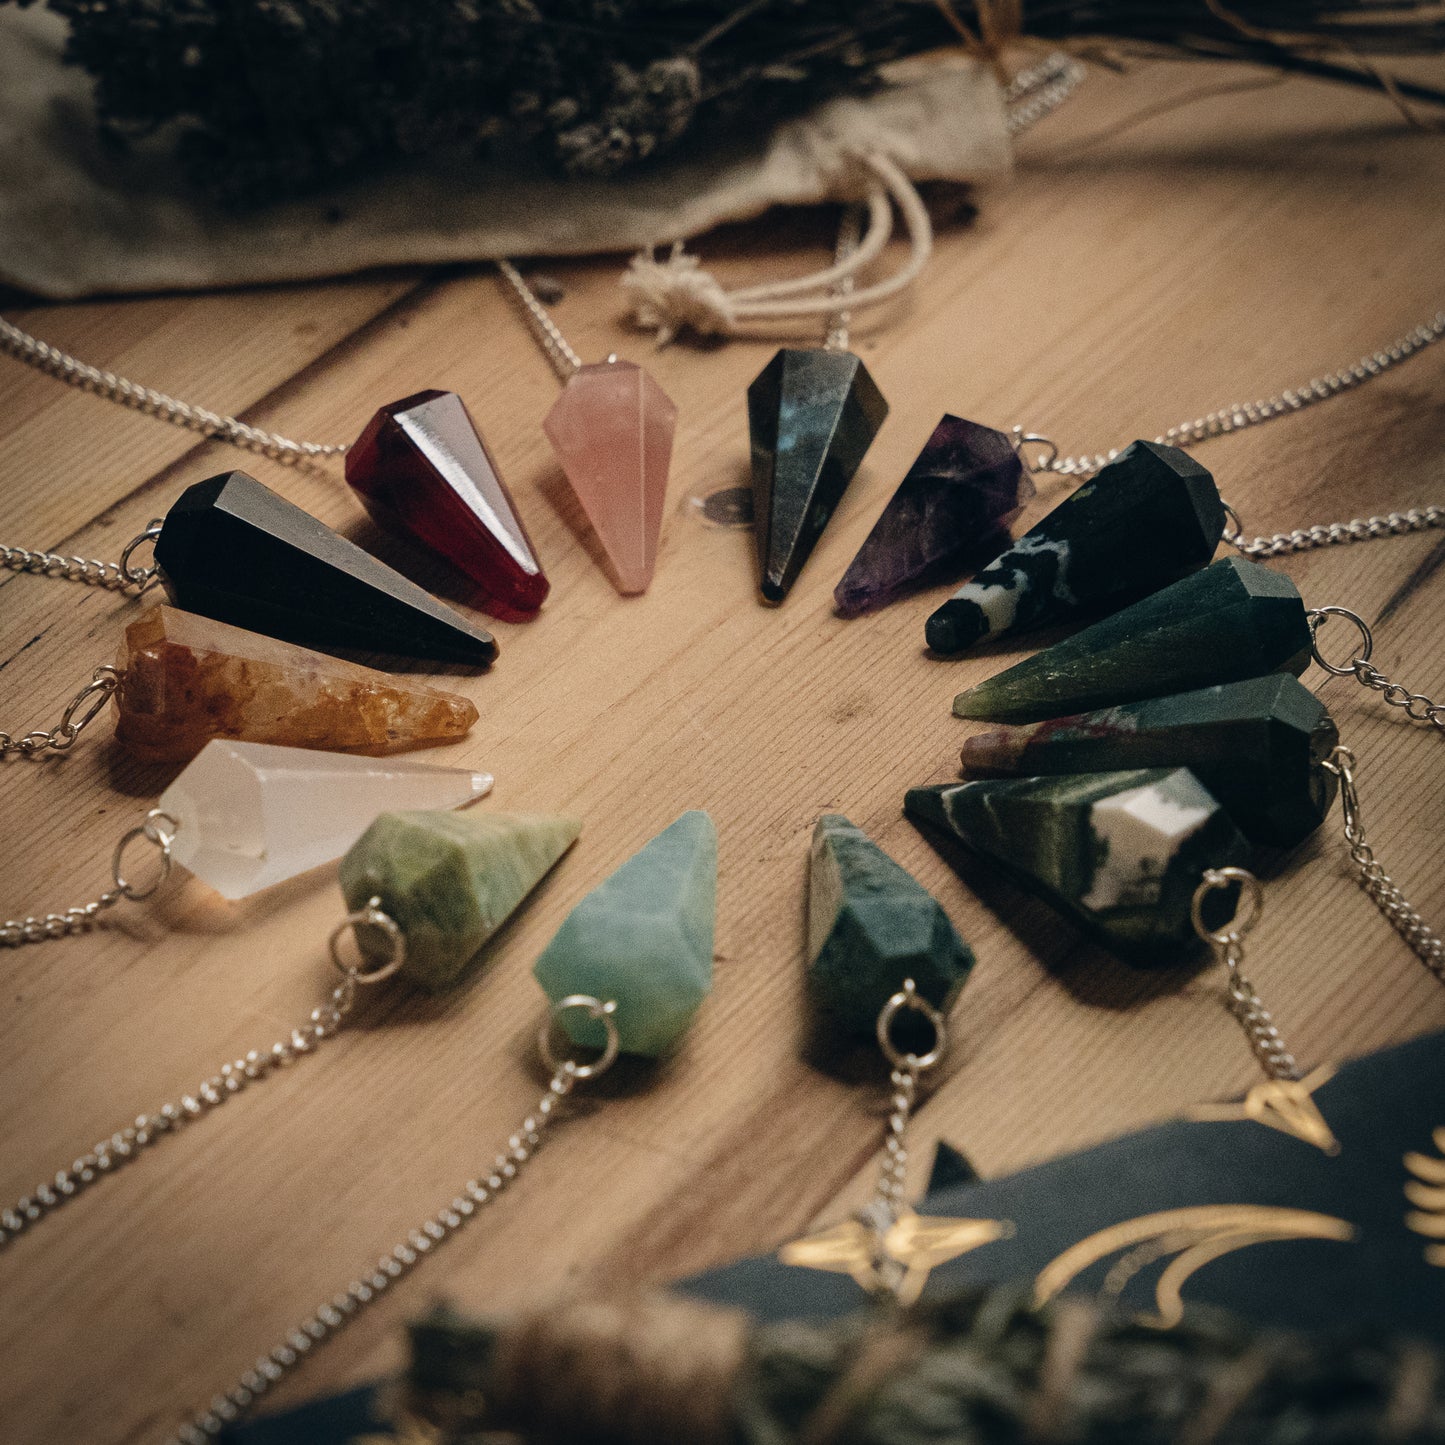 Crystal Pendulum: Divination and Energy Guidance